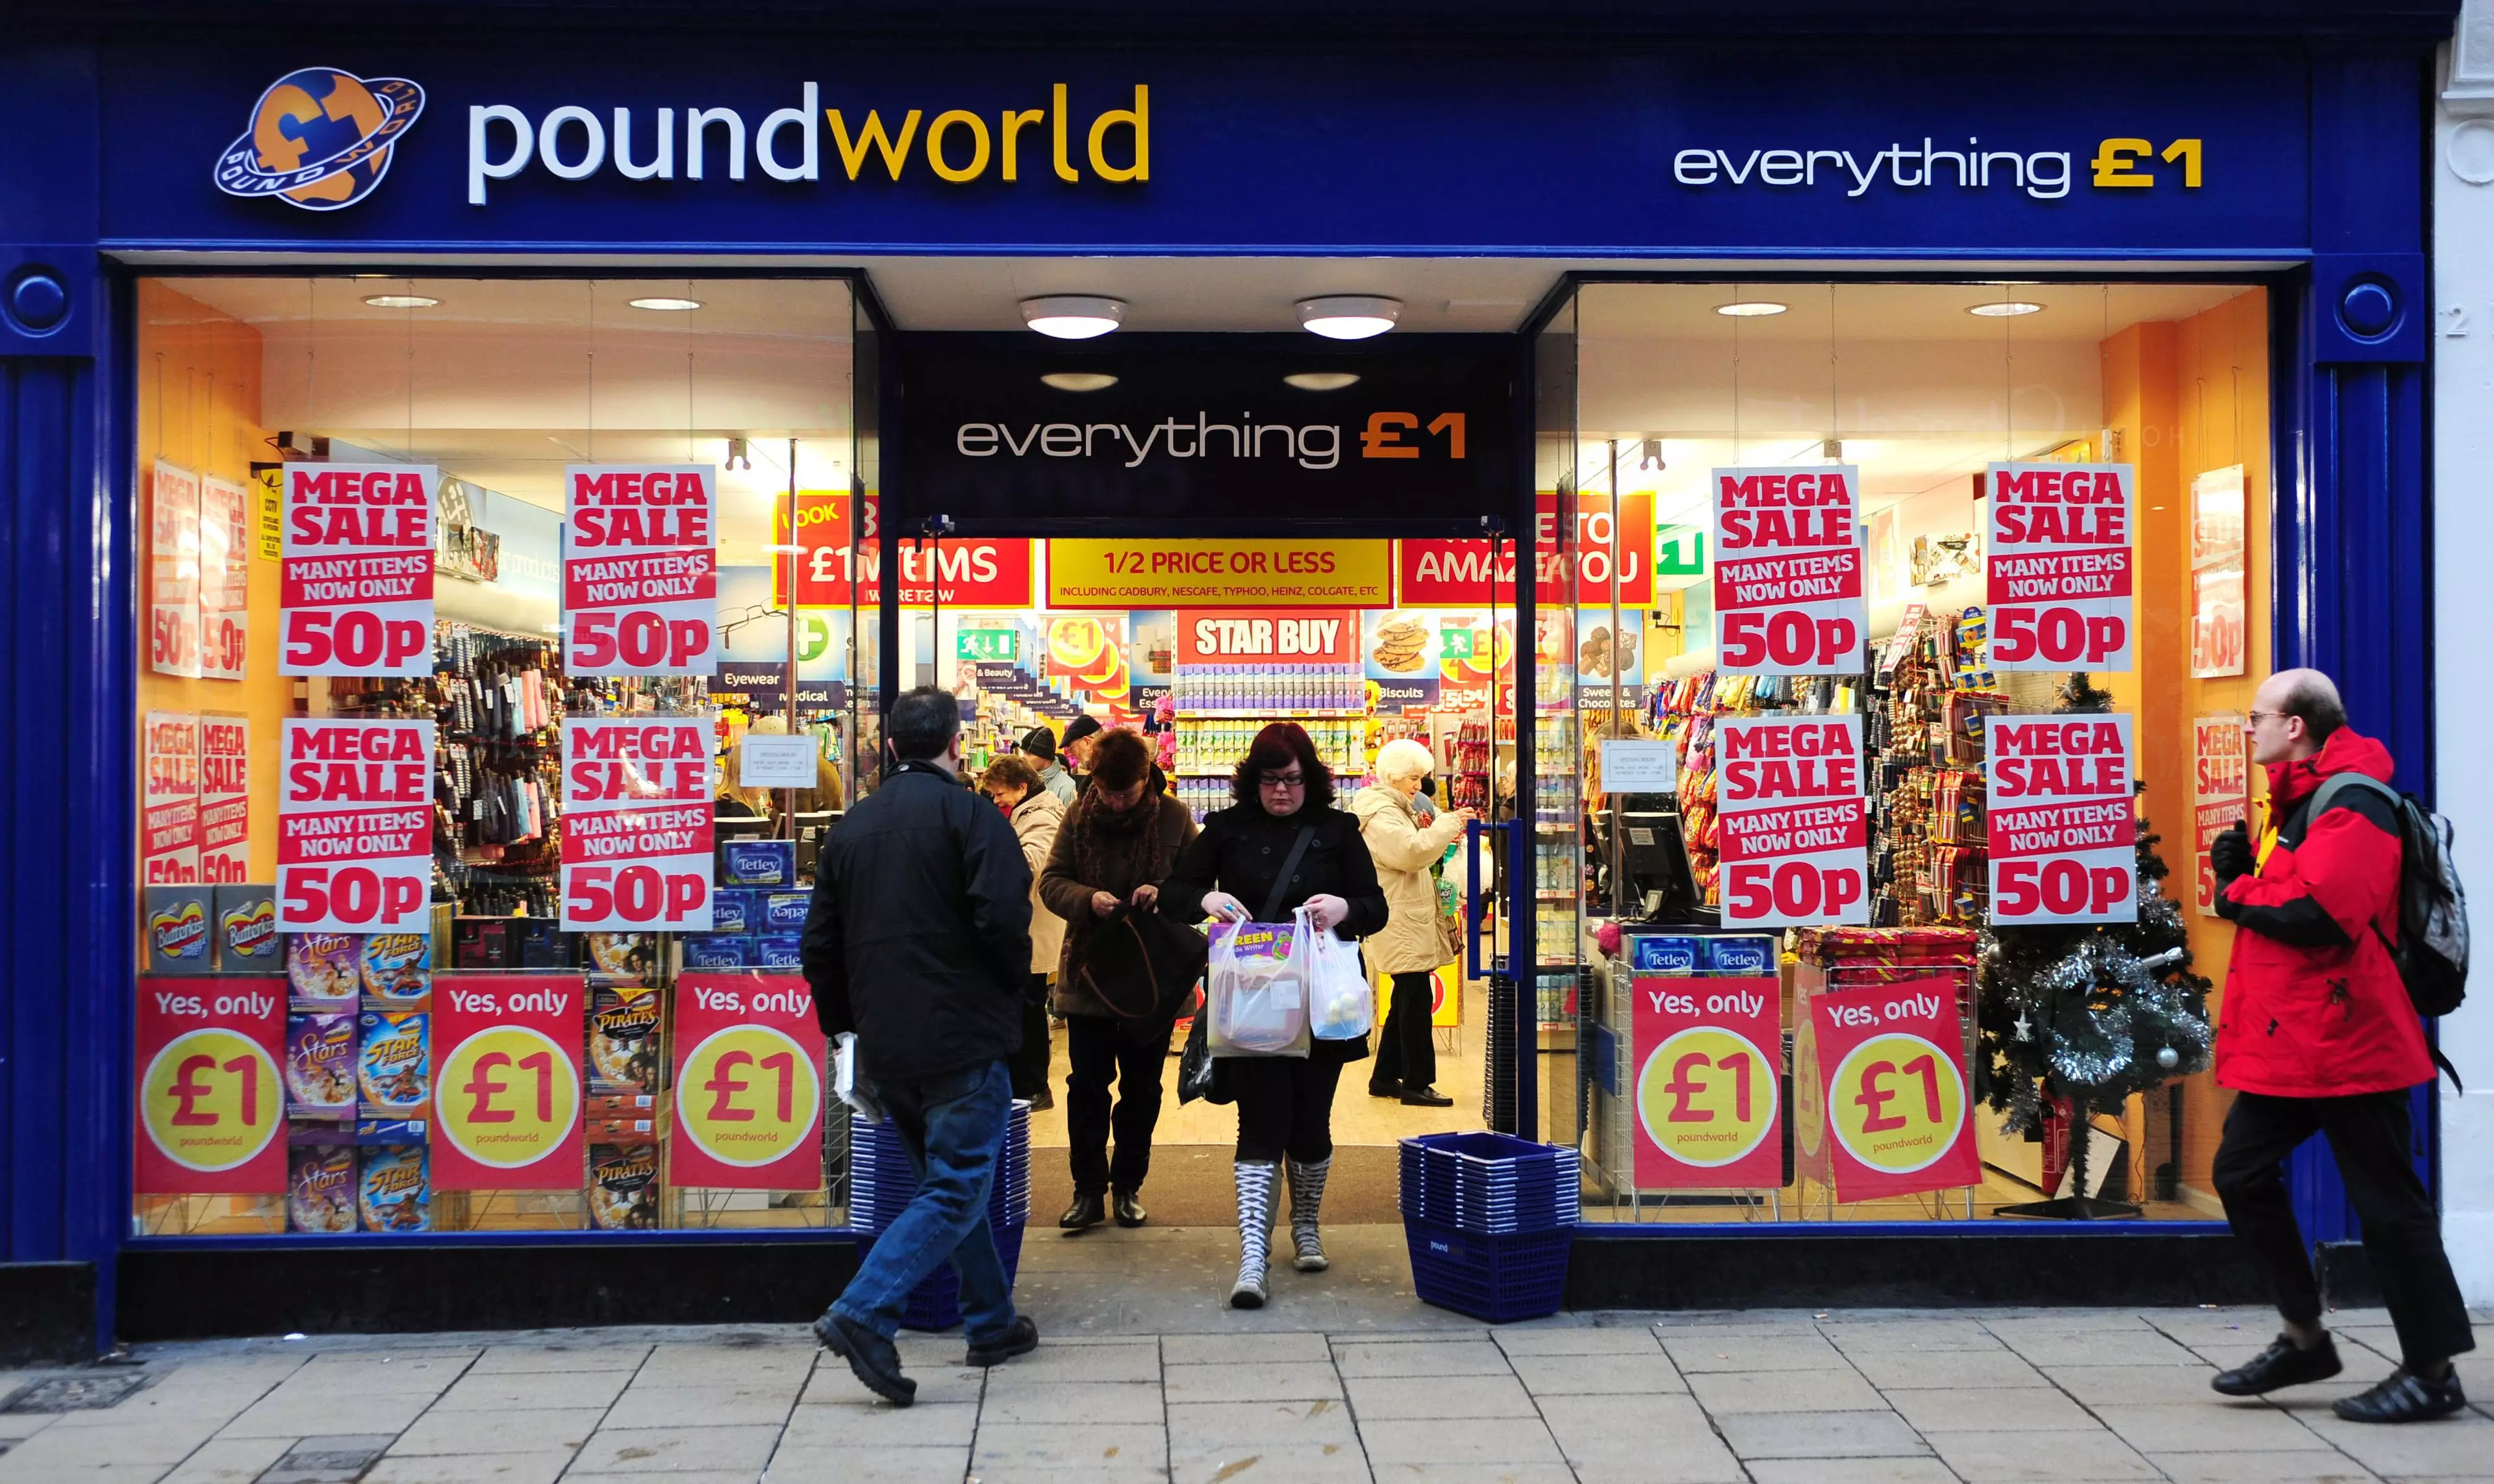 The changes come after Poundworld's collapse. (